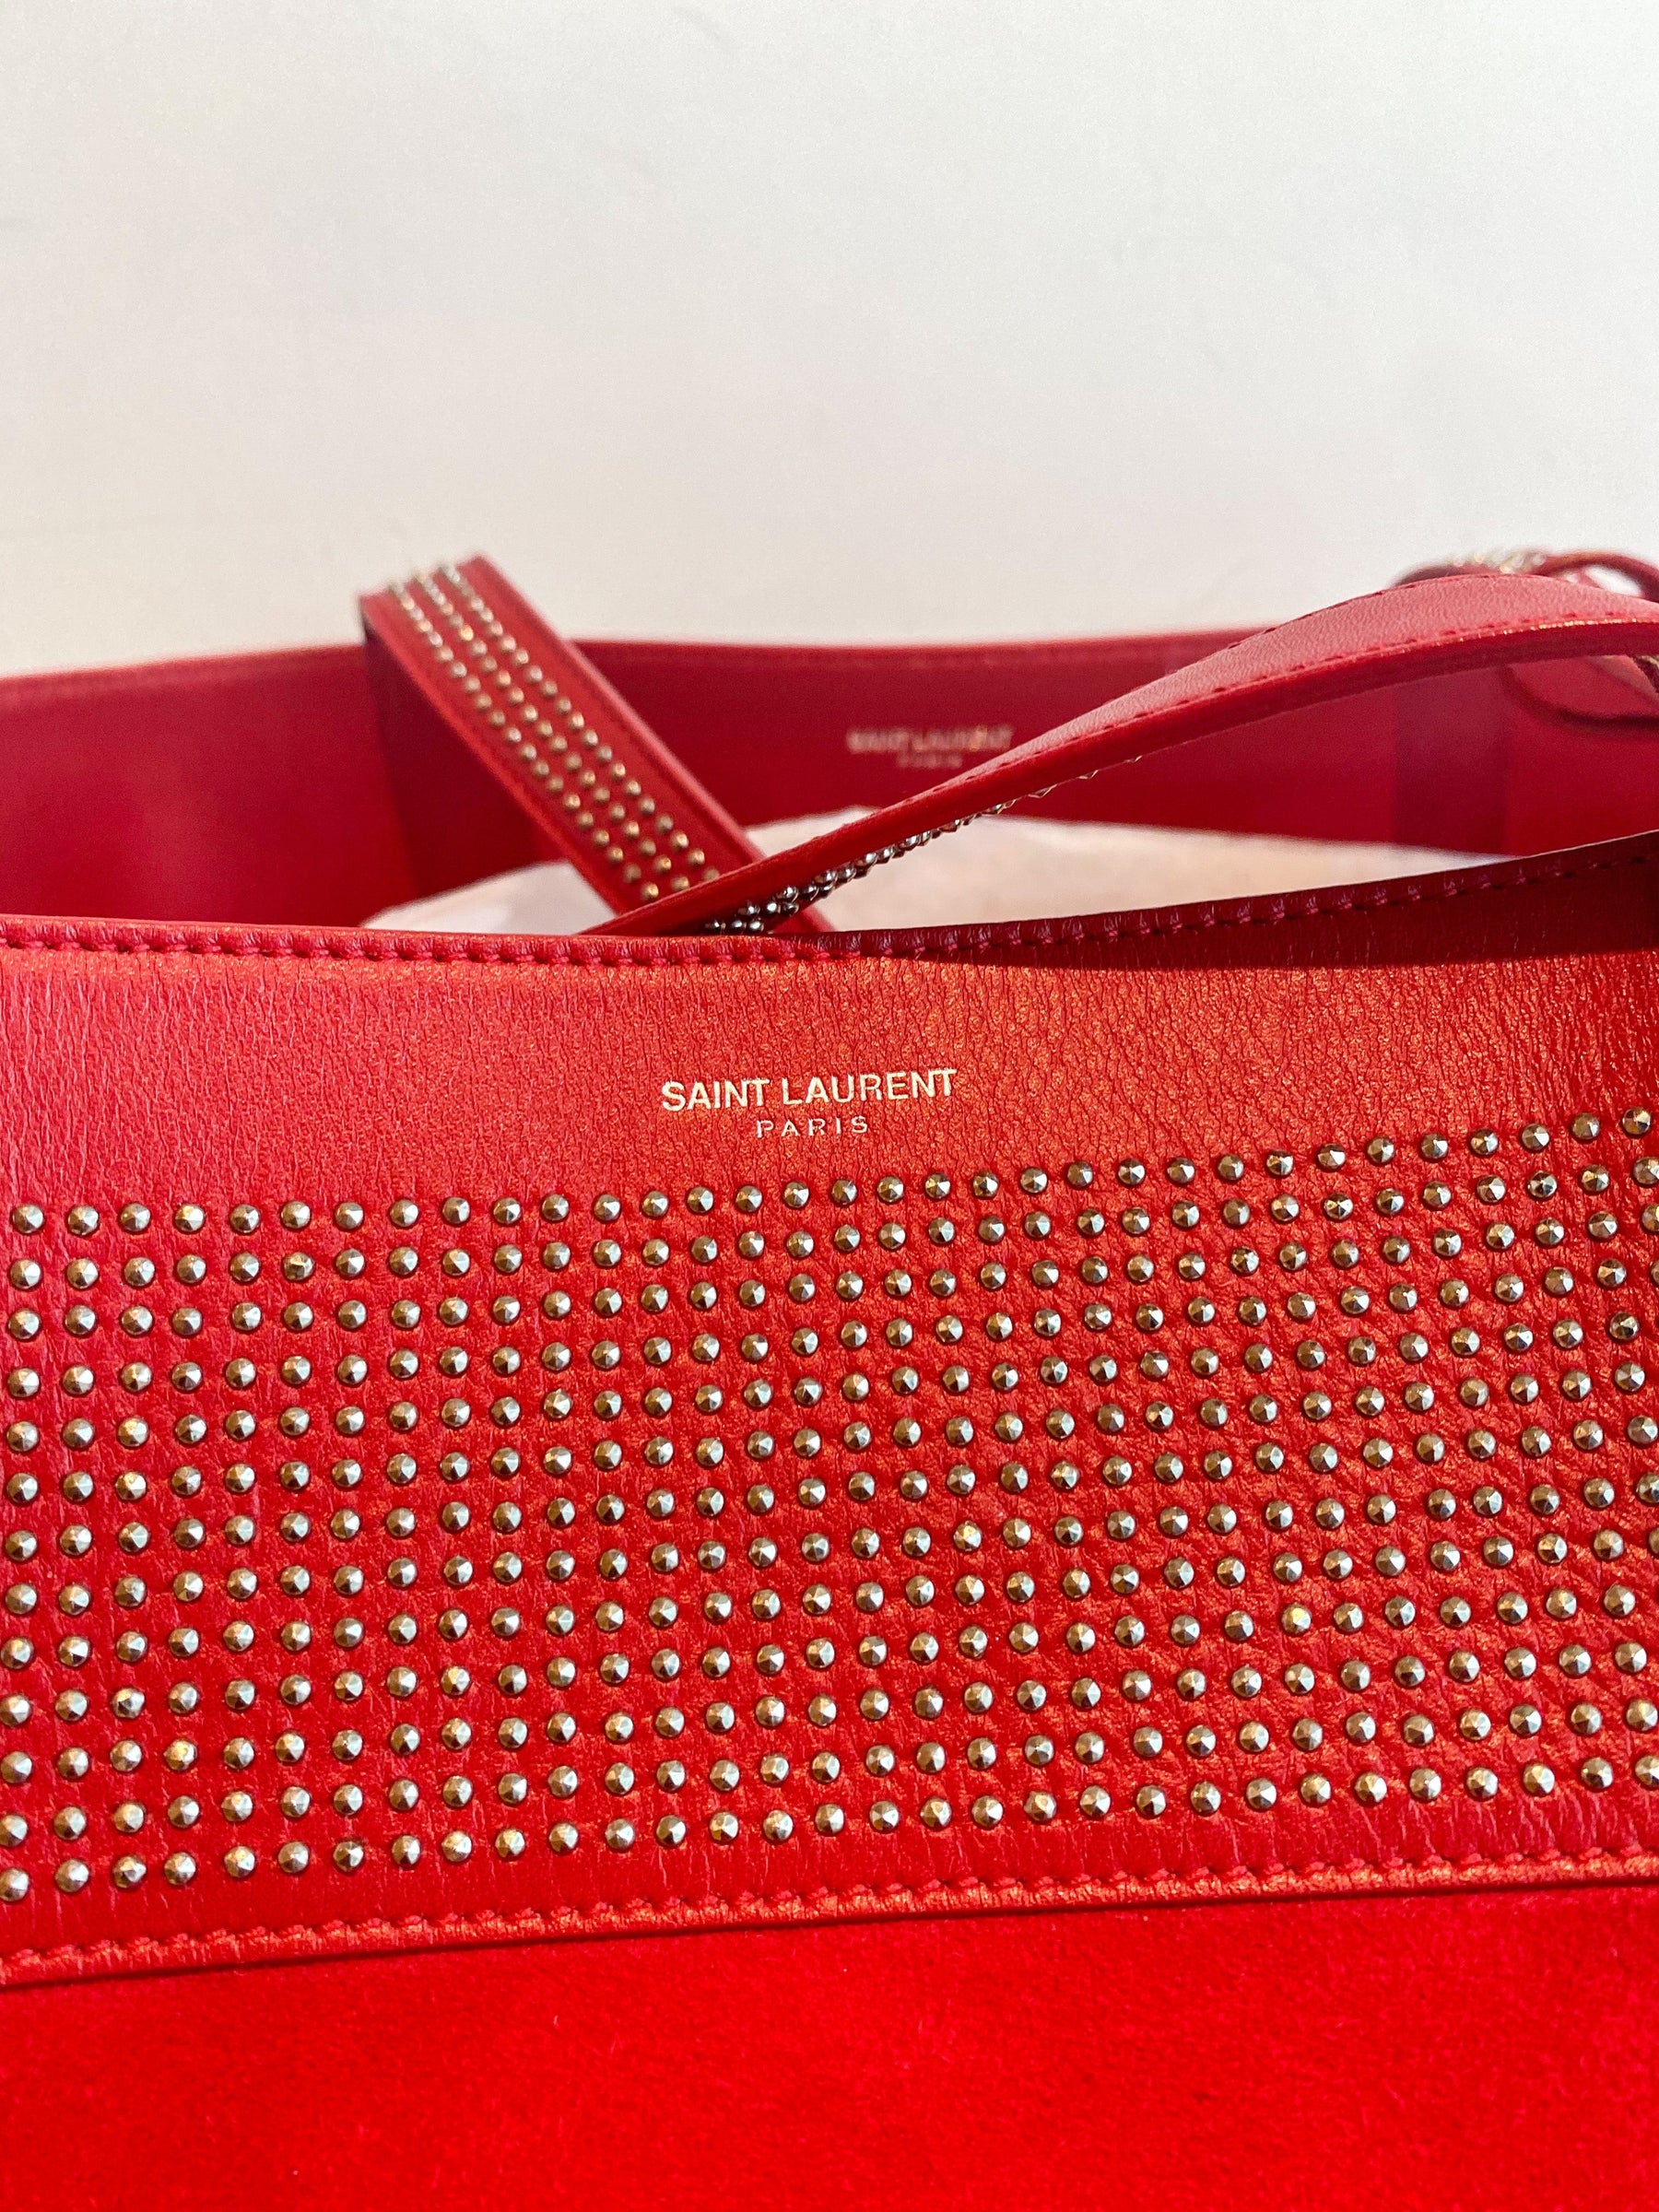 Saint Laurent Reversible Red Tote Bag Leather Suede Studded